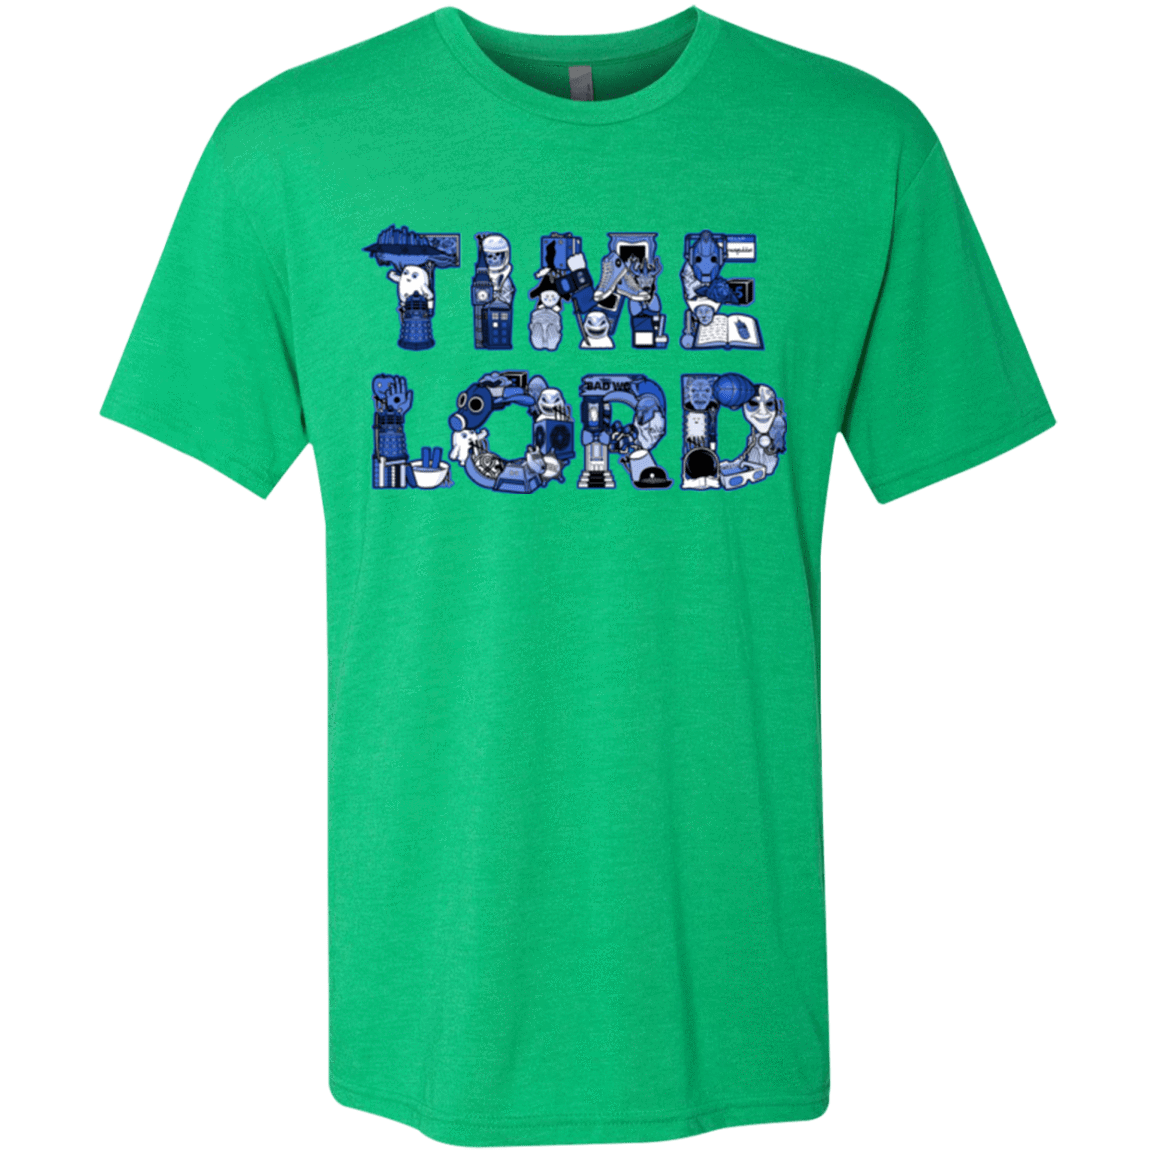 T-Shirts Envy / Small Timelord Men's Triblend T-Shirt